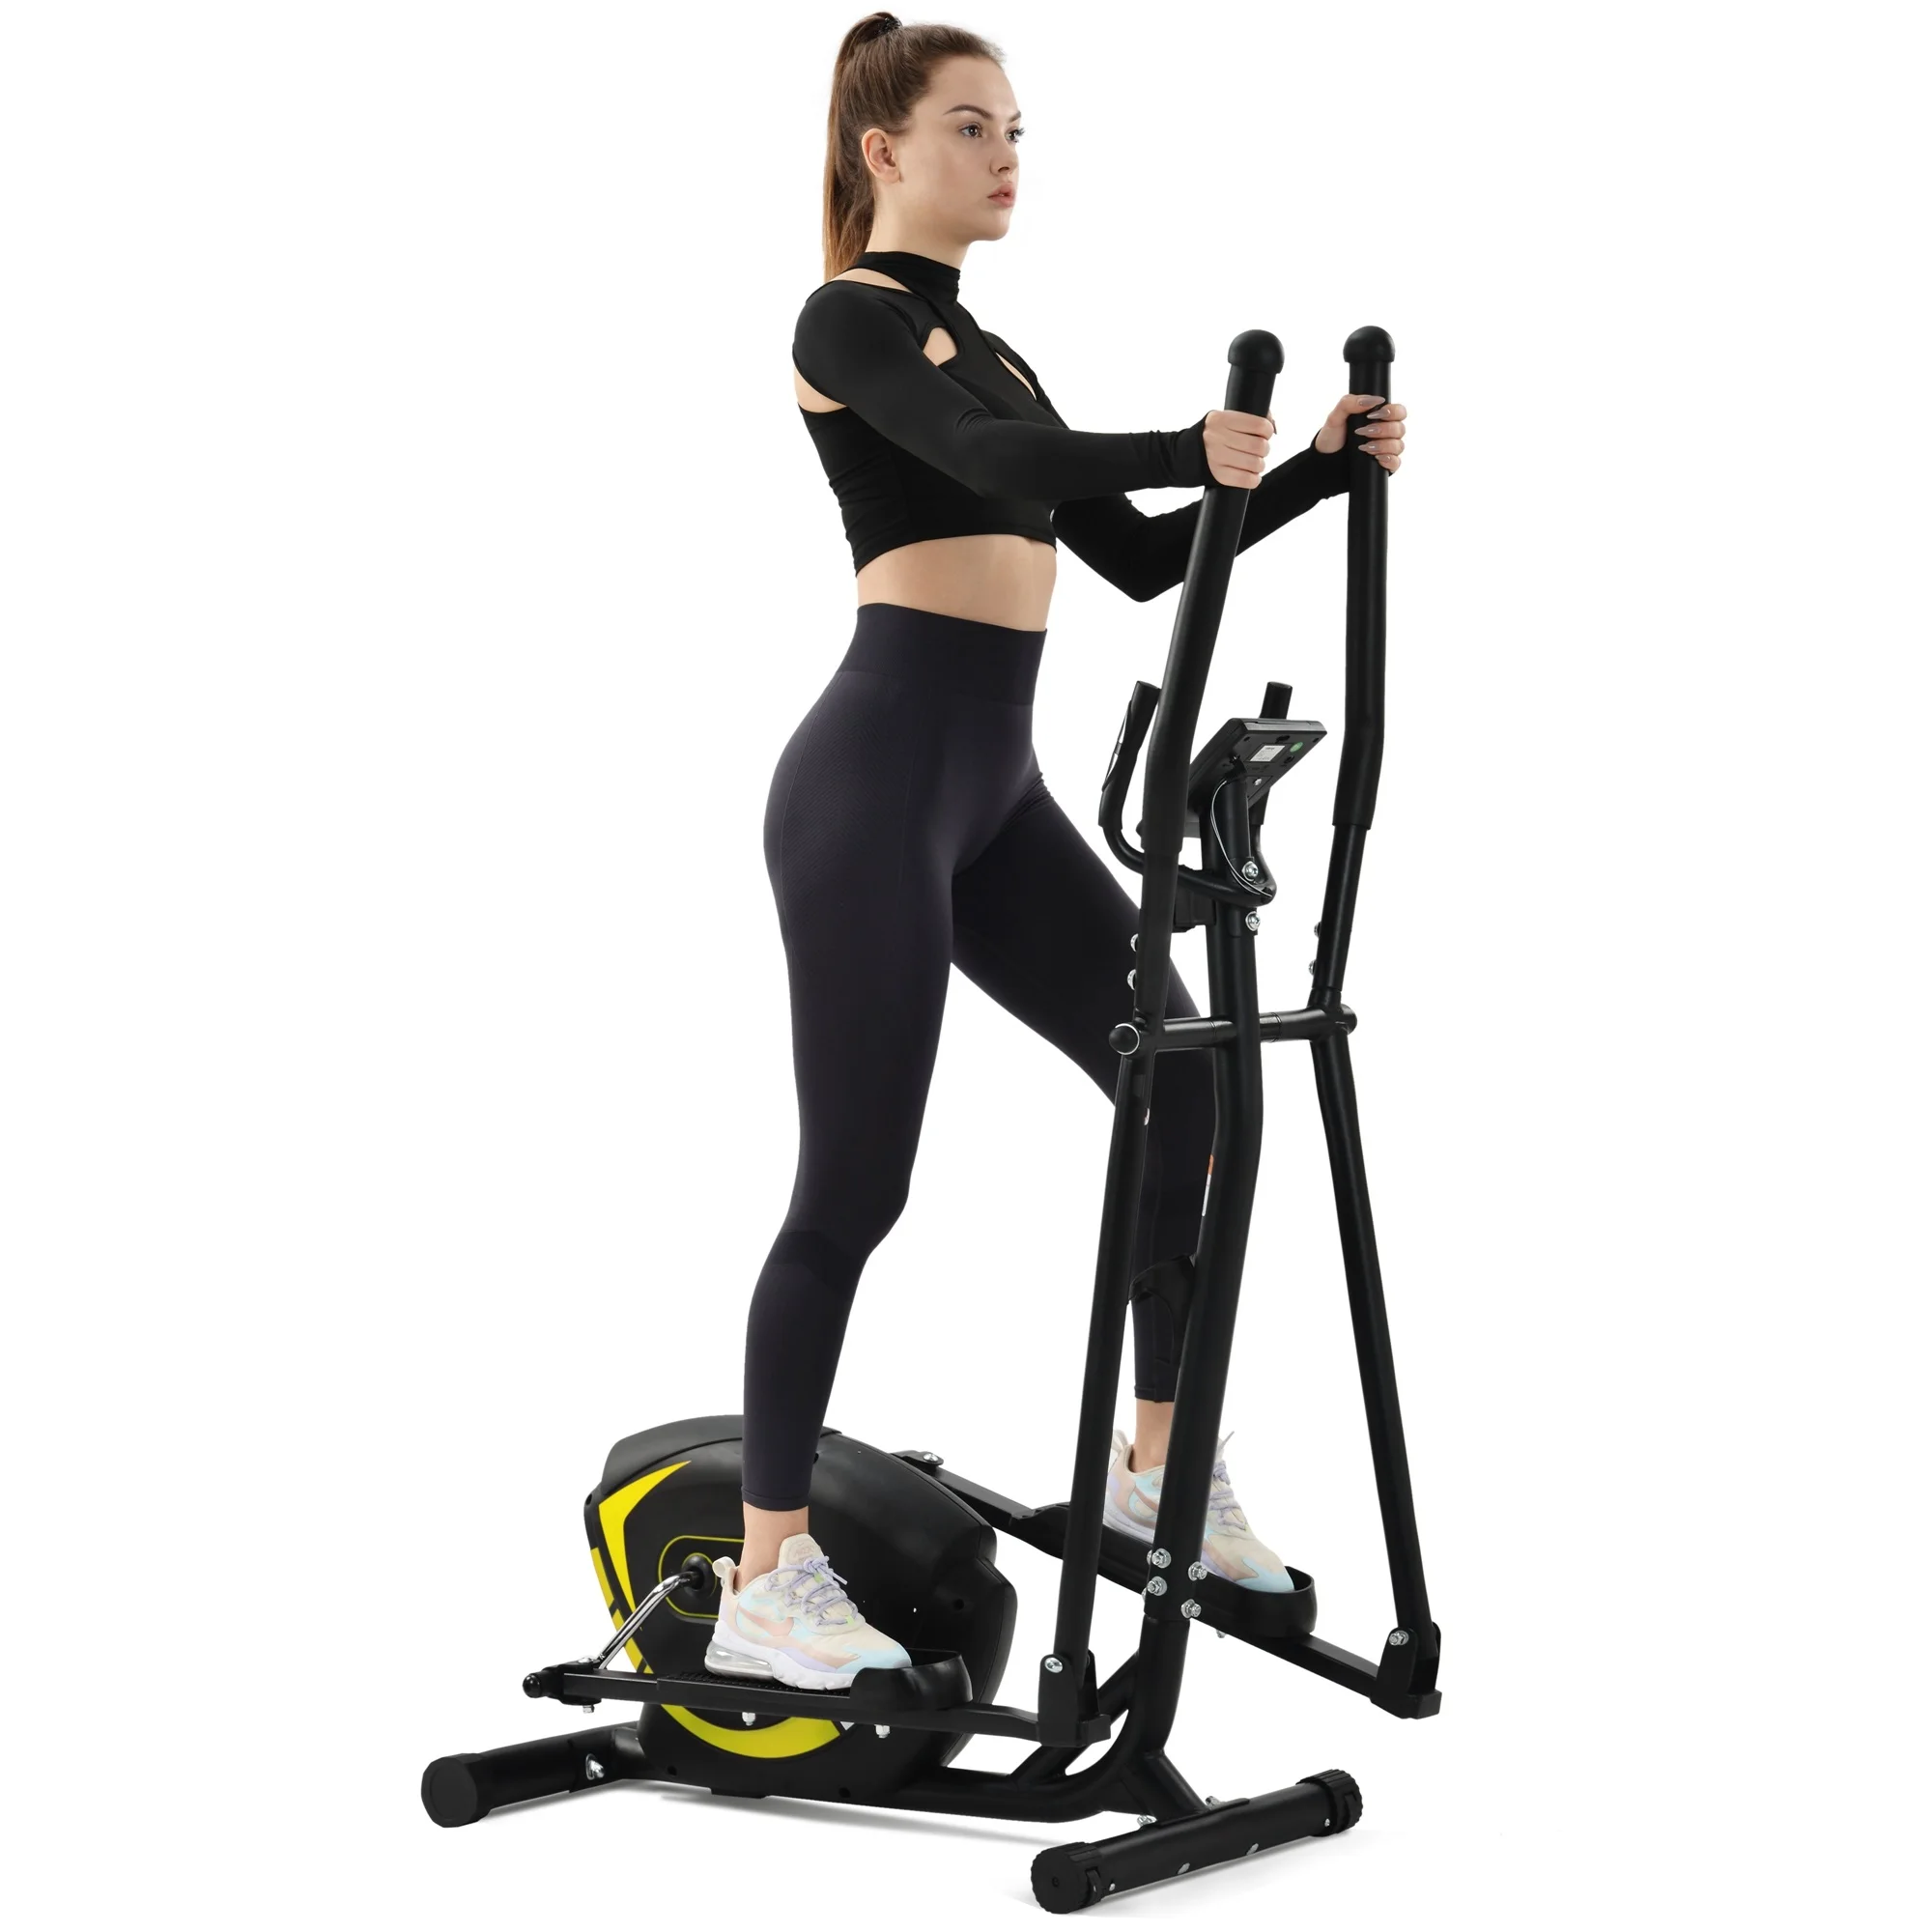 

GO Elliptical Trainer Machine Upright Exercise Bike with 8-Level Magnetic Resistance for Home Gym Cardio Workout